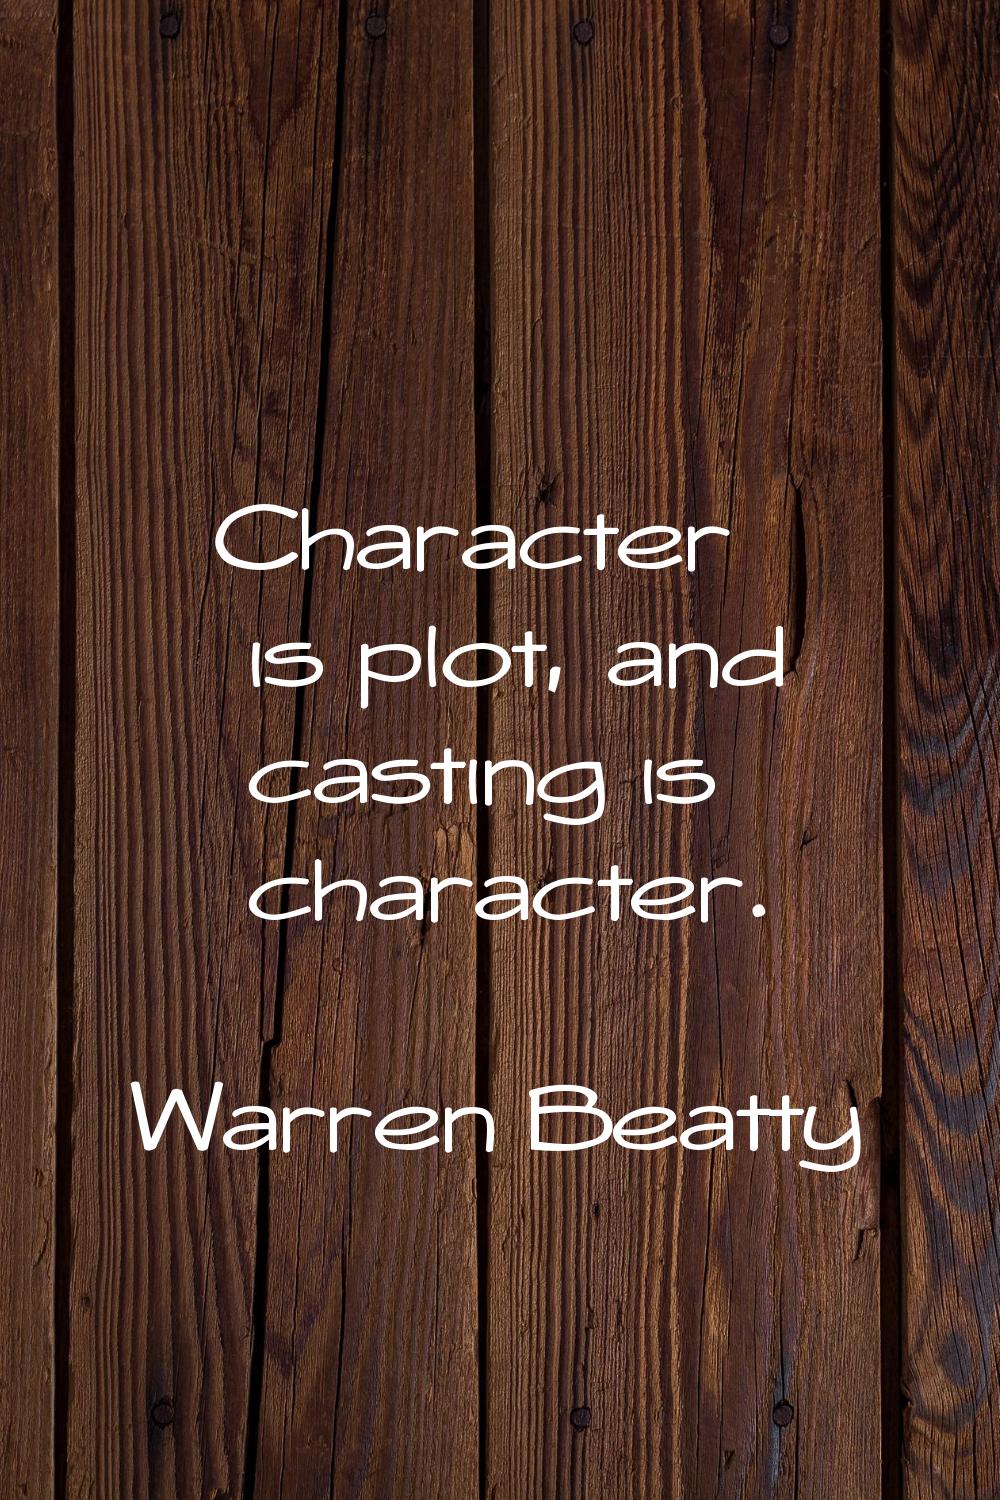 Character is plot, and casting is character.